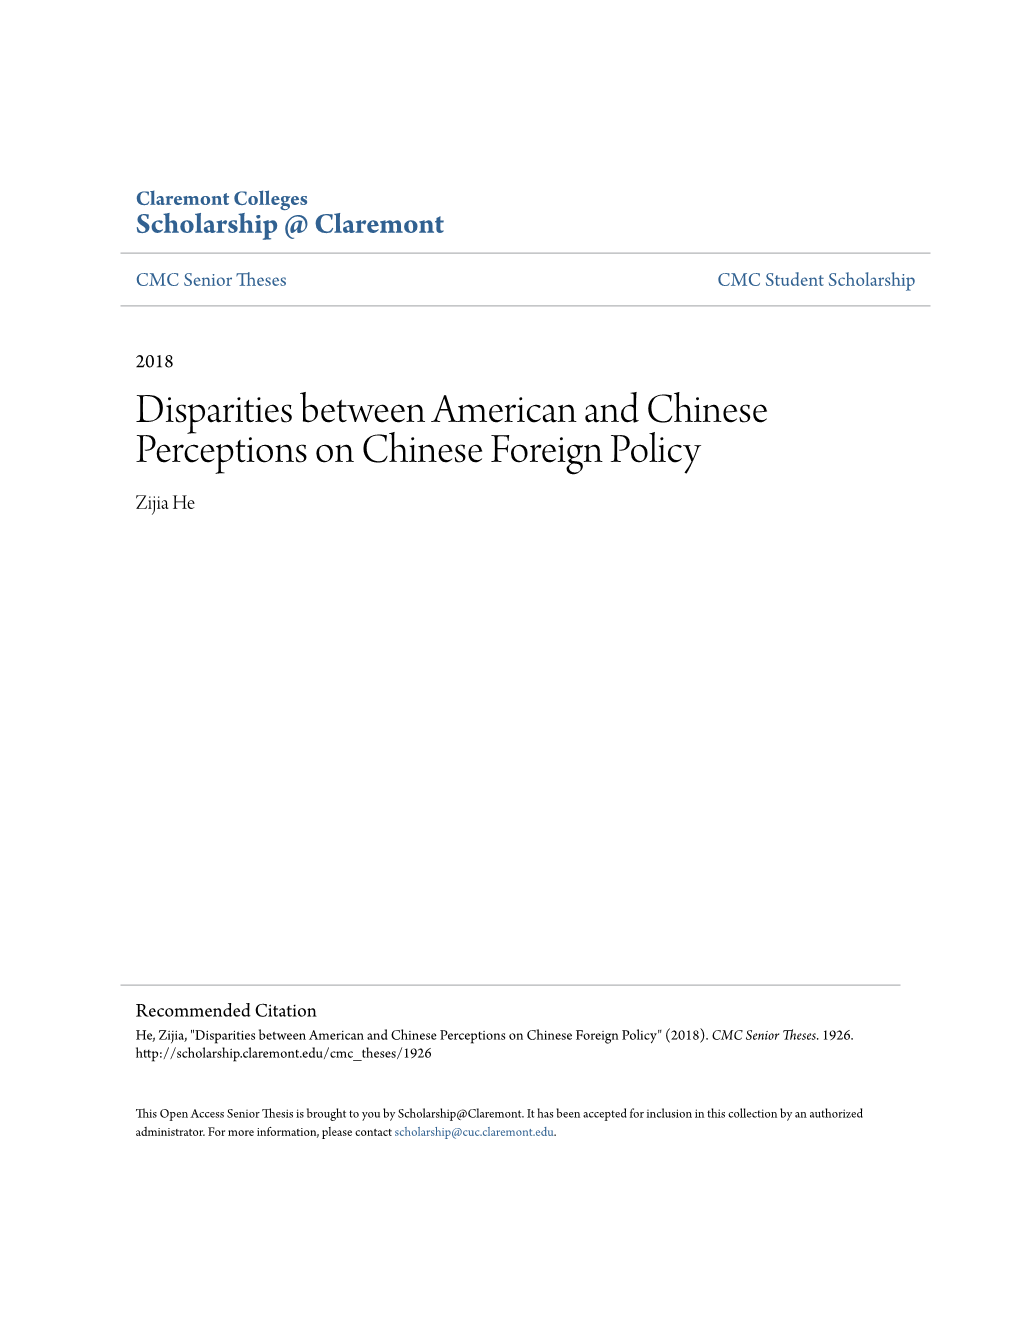 Disparities Between American and Chinese Perceptions on Chinese Foreign Policy Zijia He